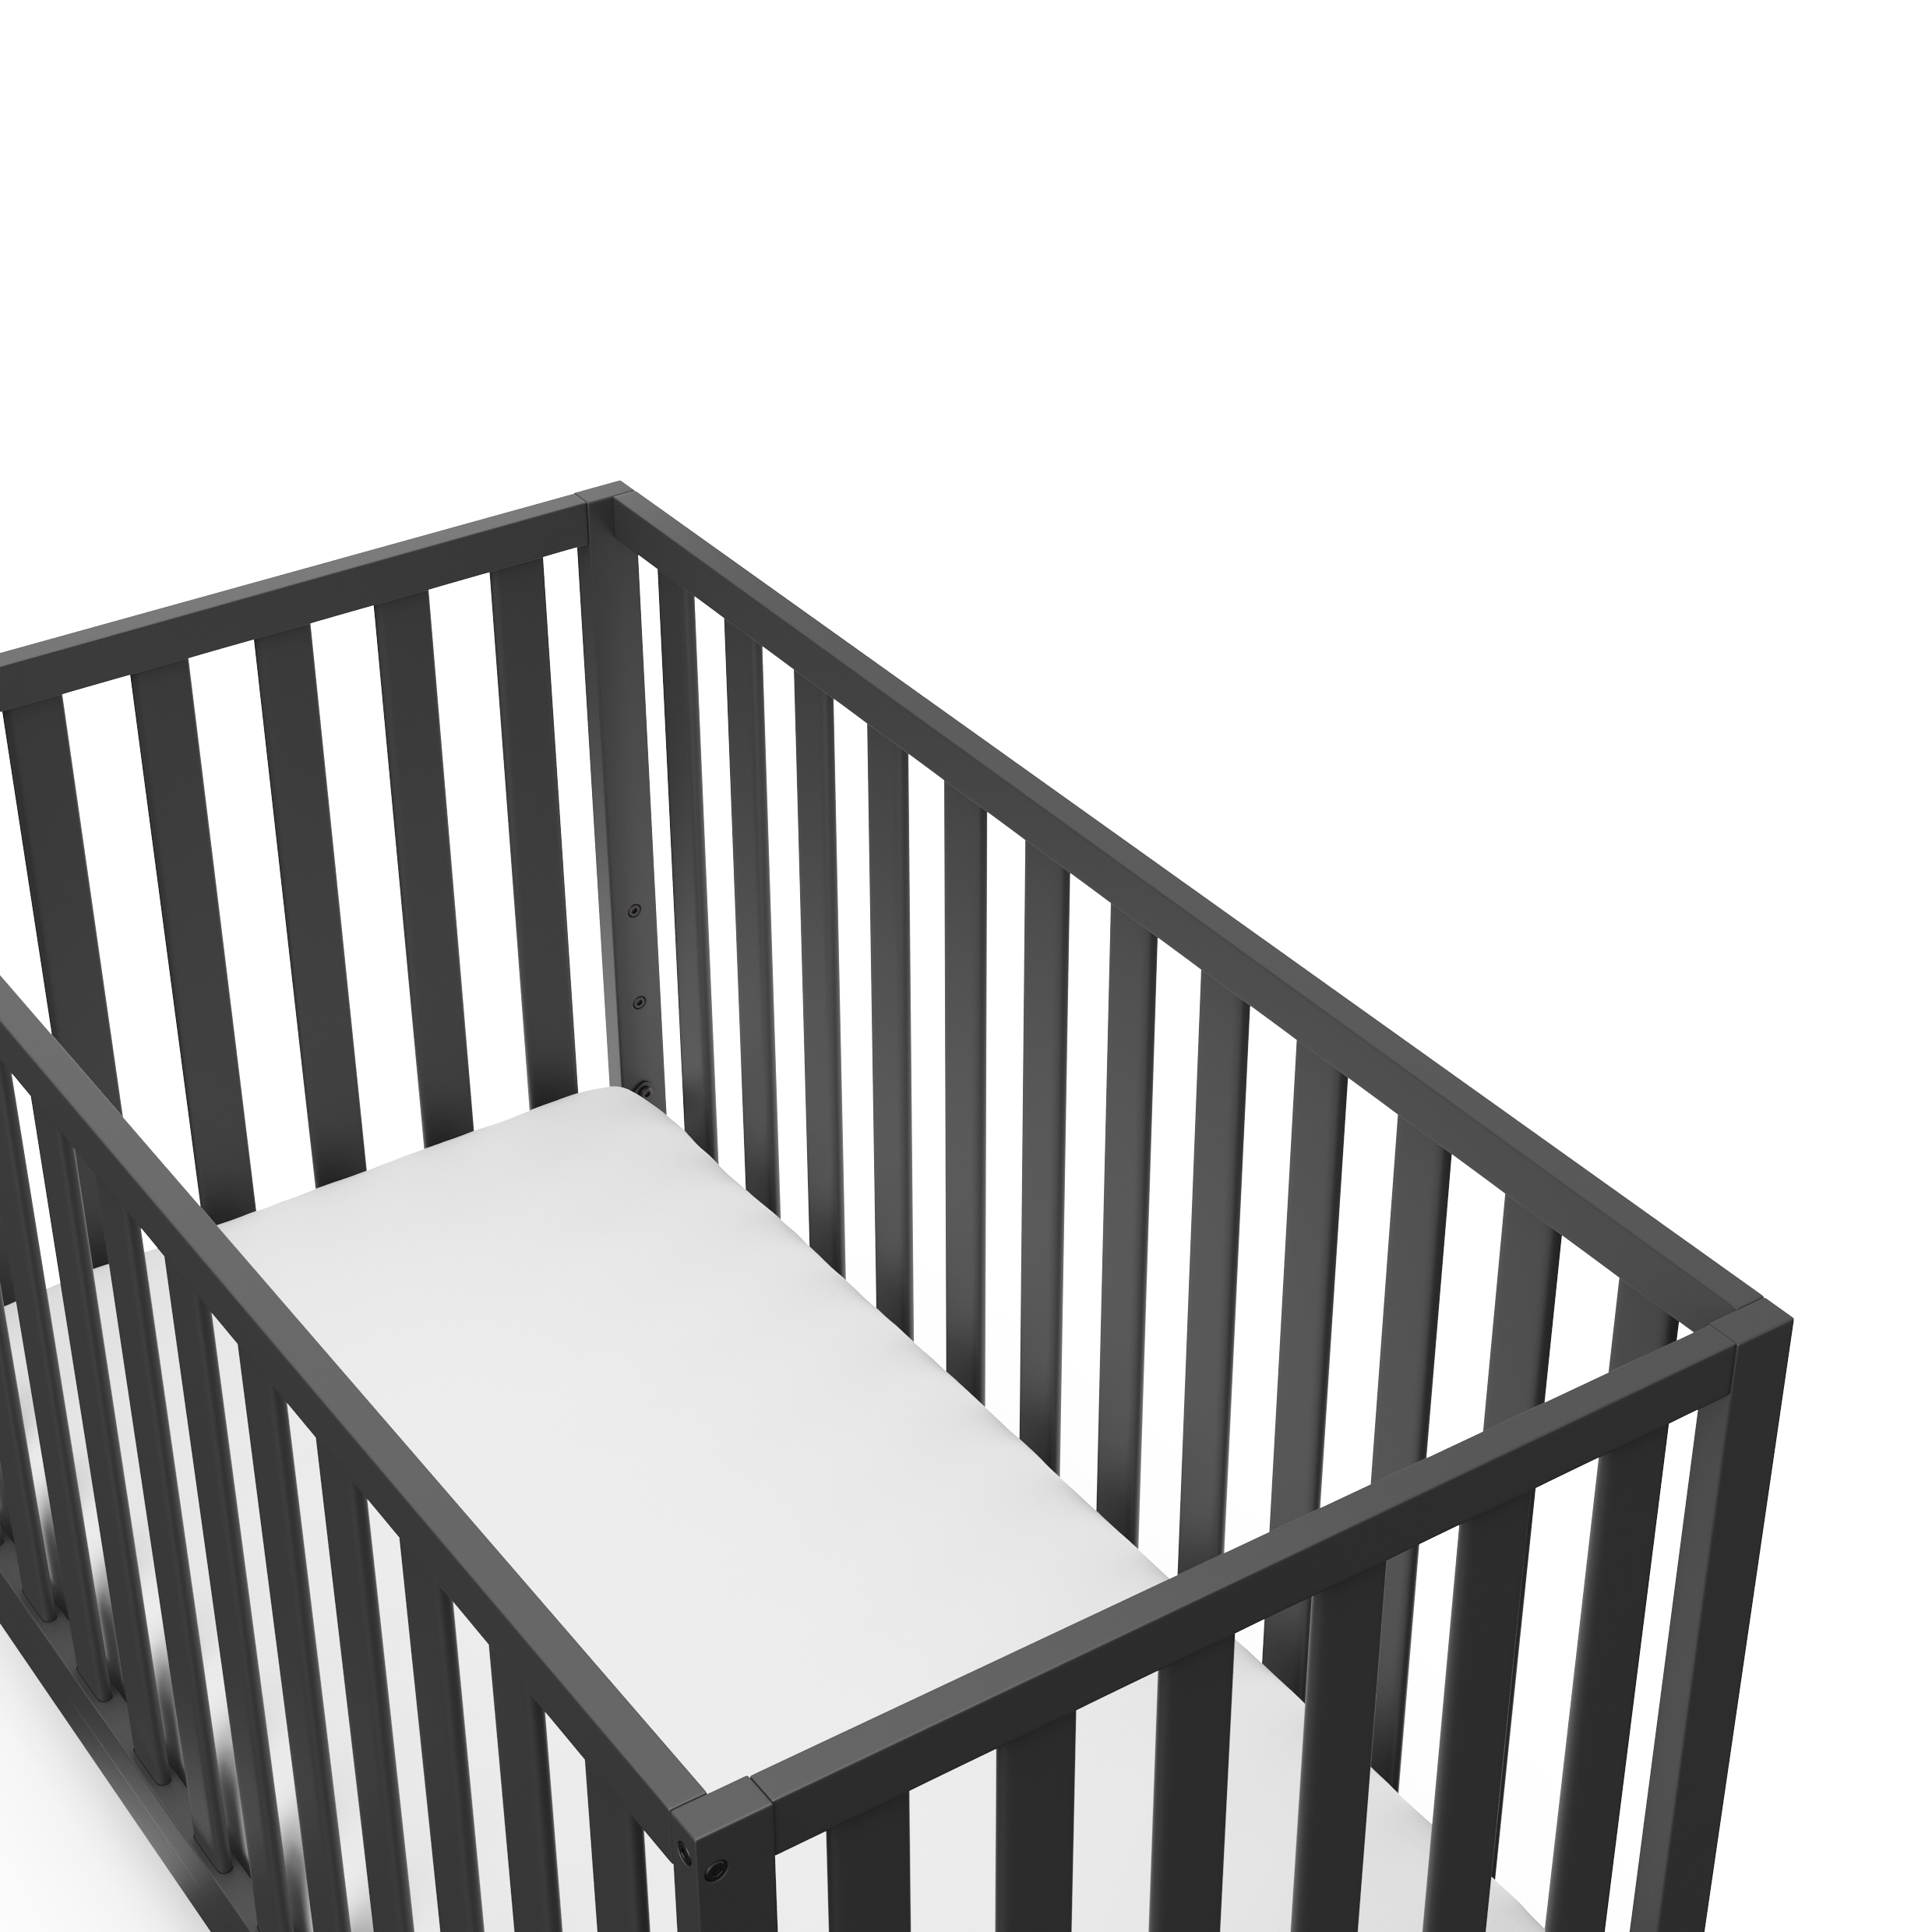 Storkcraft Sunset 4-in-1 Convertible Baby Crib, Gray - image 5 of 8